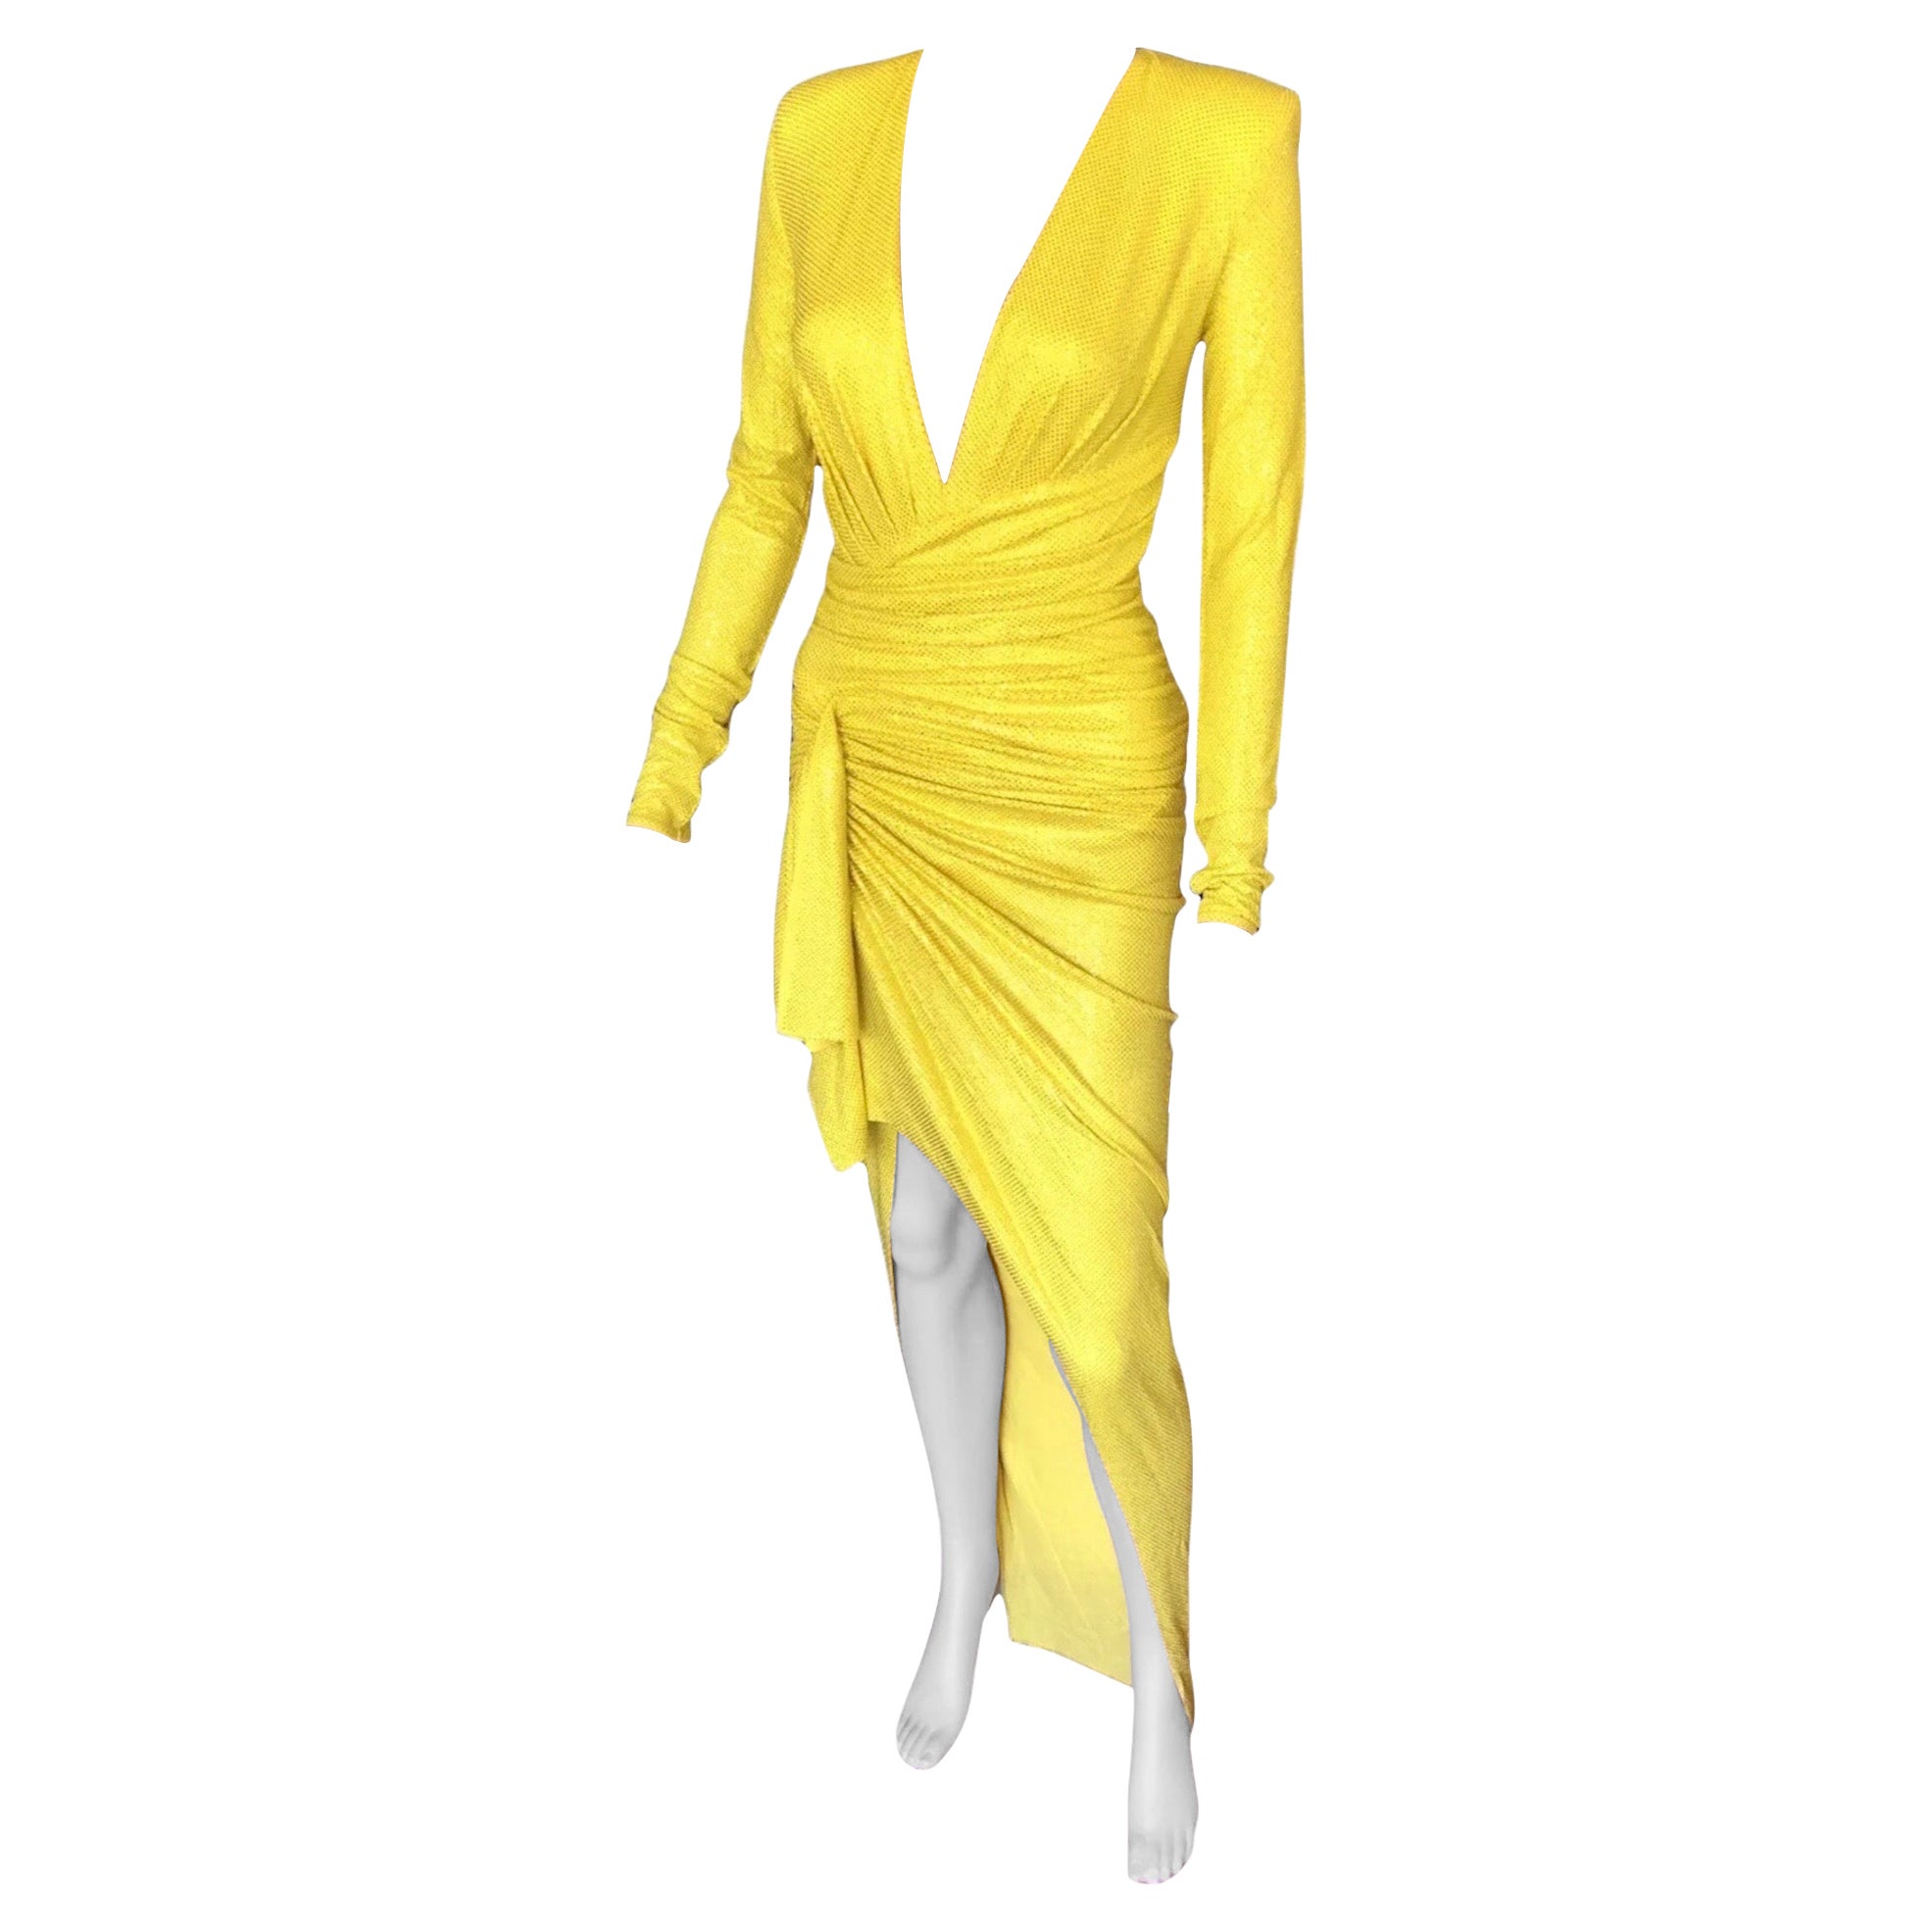 Alexandre Vauthier Crystal Embellished Plunging Yellow Evening Dress Gown